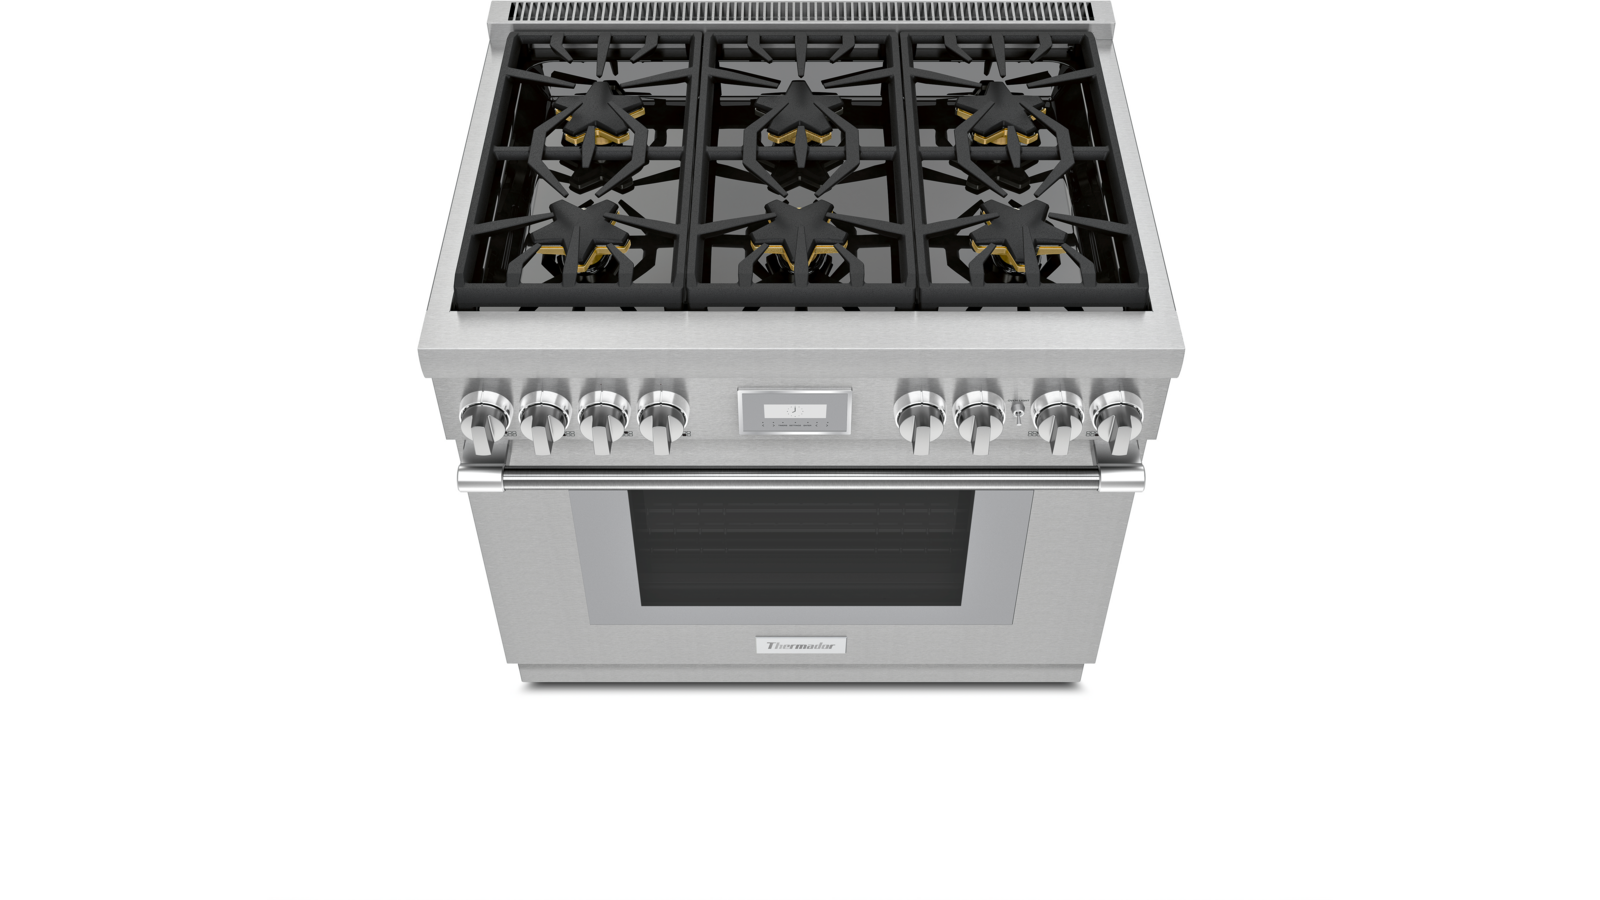 Thermador Prg366wh Gas Professional Range